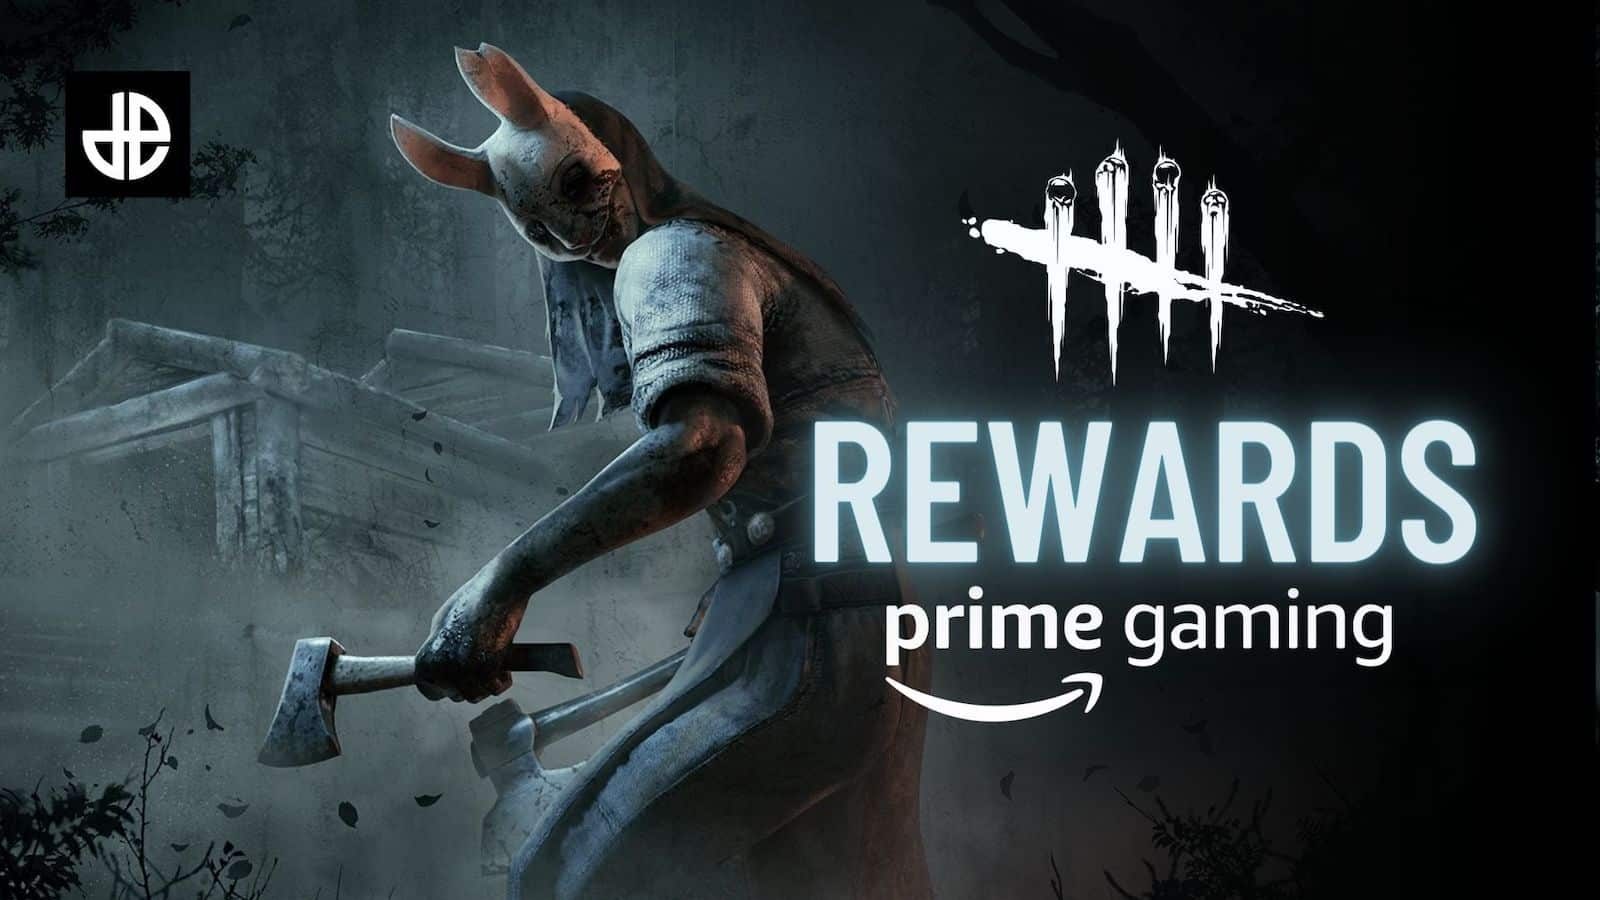 dead-by-daylight-prime-gaming-rewards-loot-drops-1290360